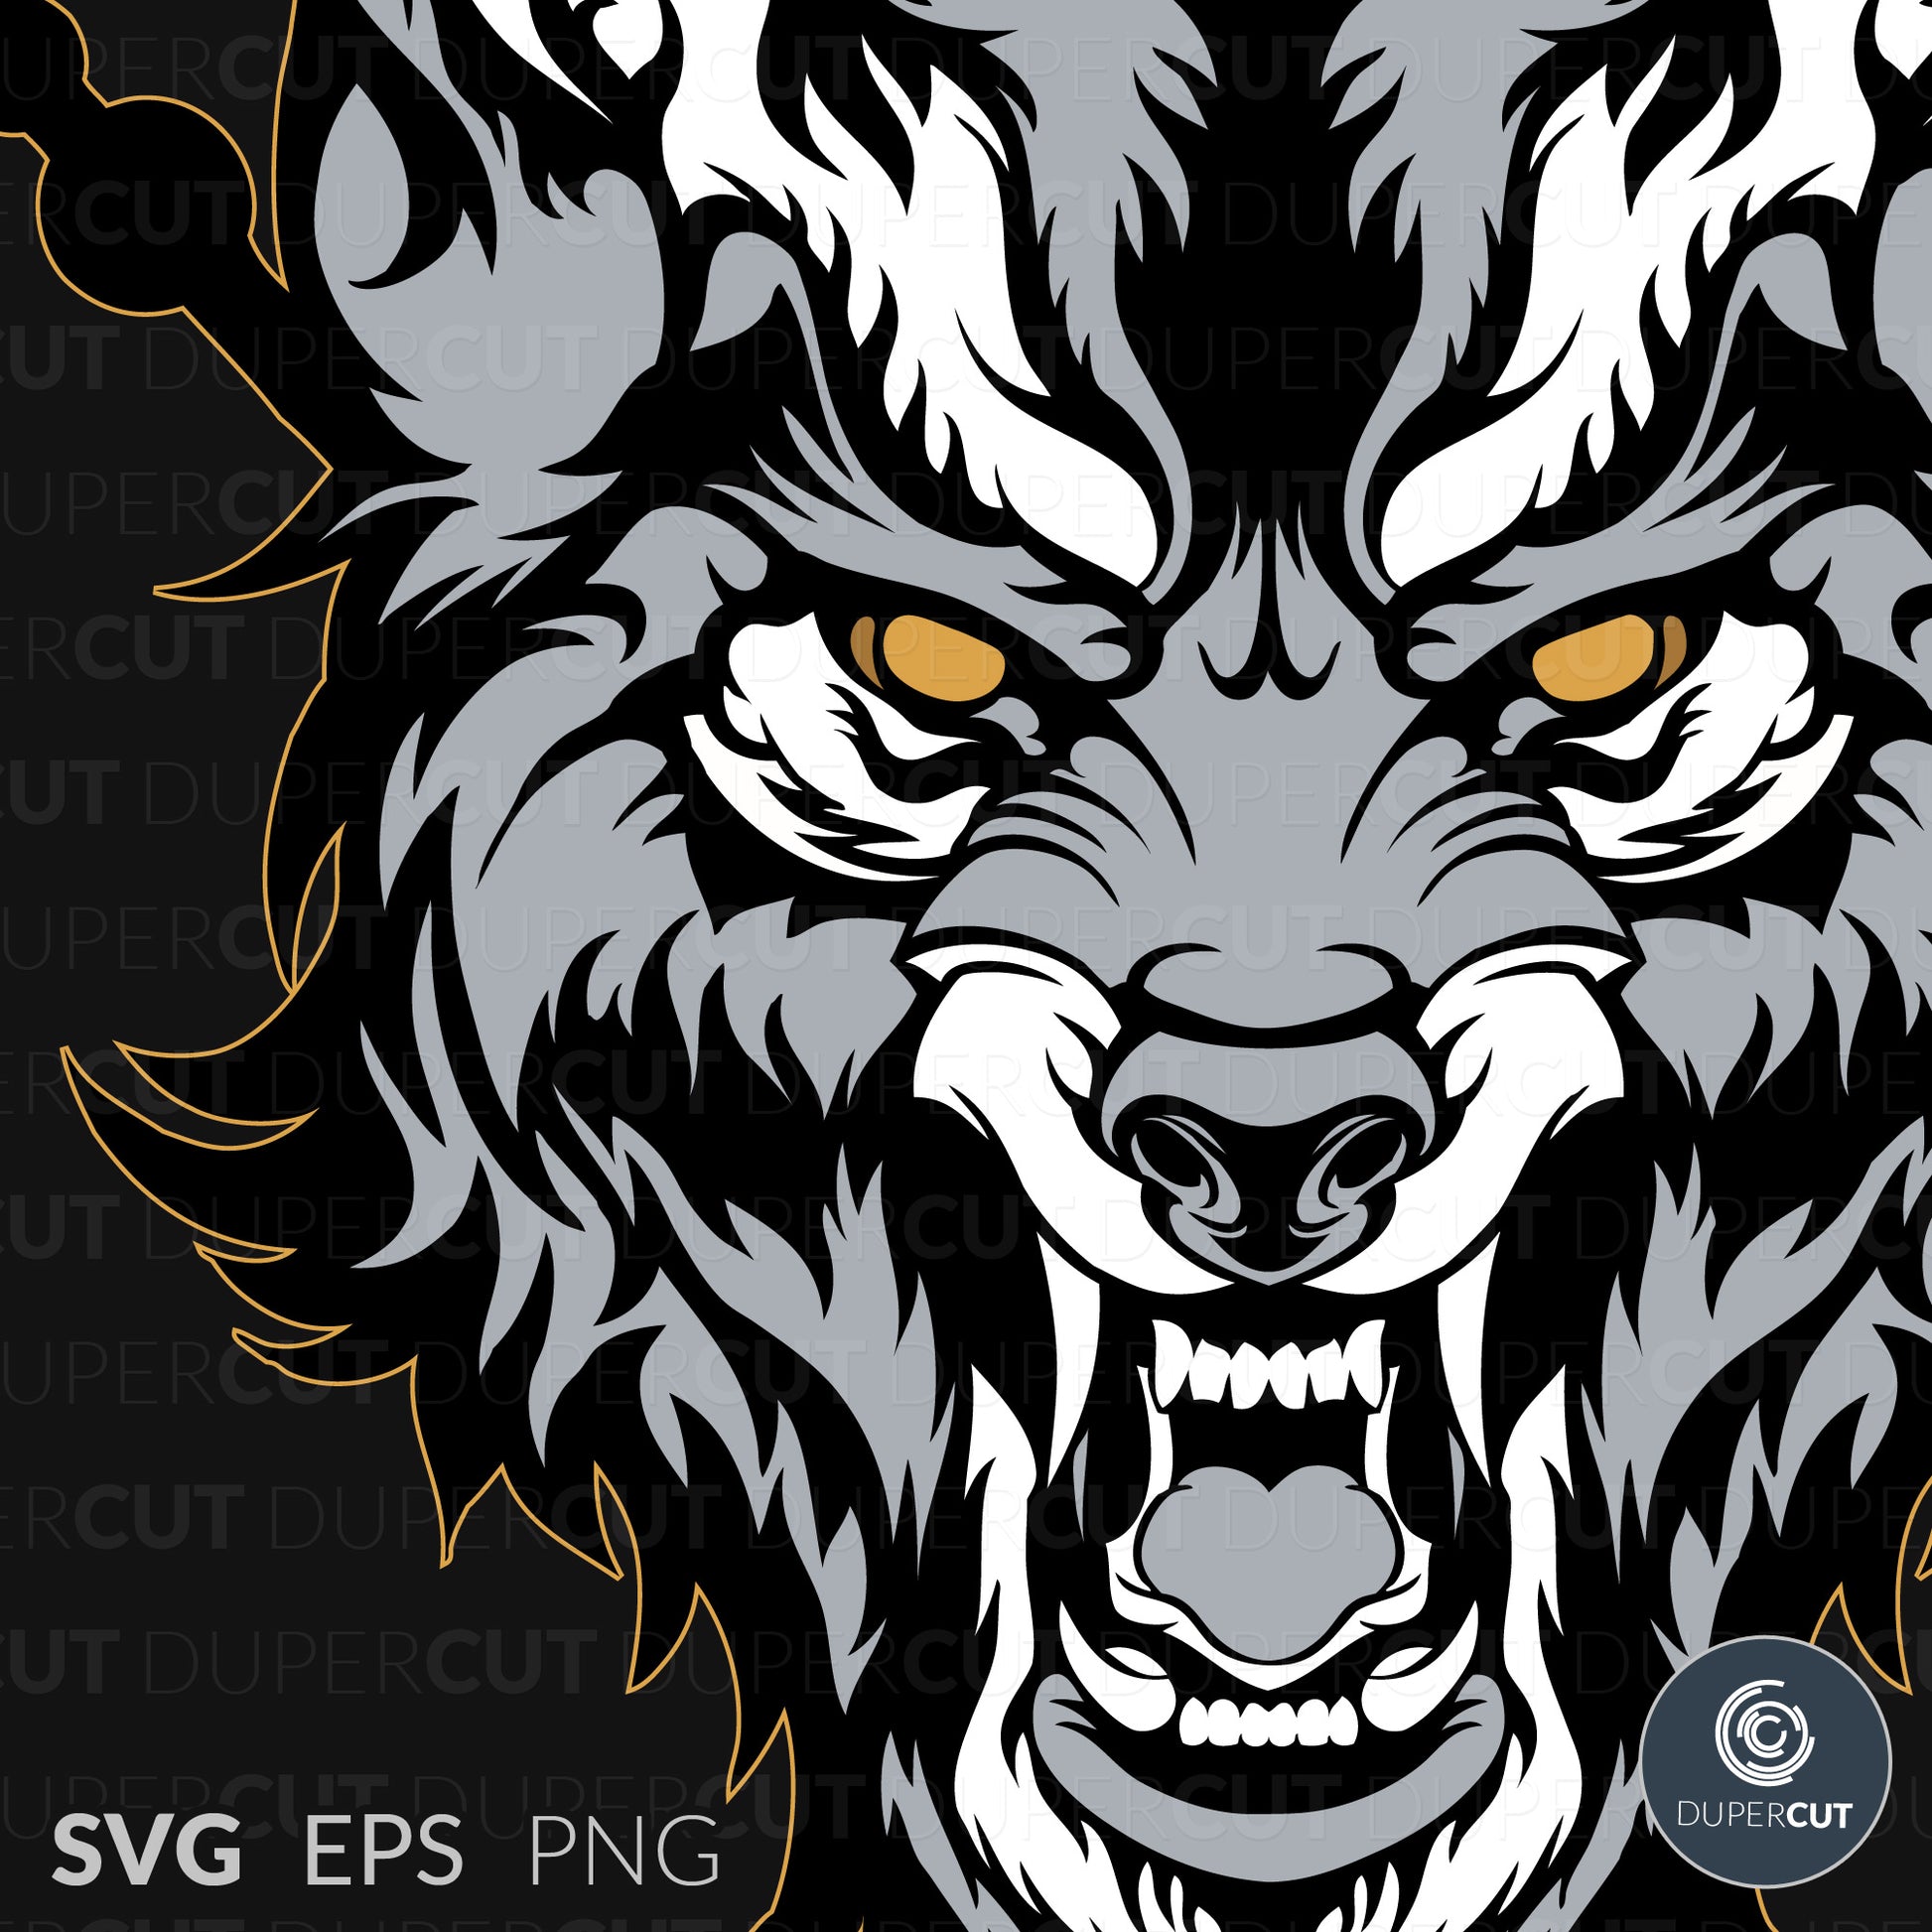 Roaring wolf head - EPS, SVG, PNG files. Vector Colour illustration for print on demand, sublimation, custom t-shirts, hoodies, tumblers.